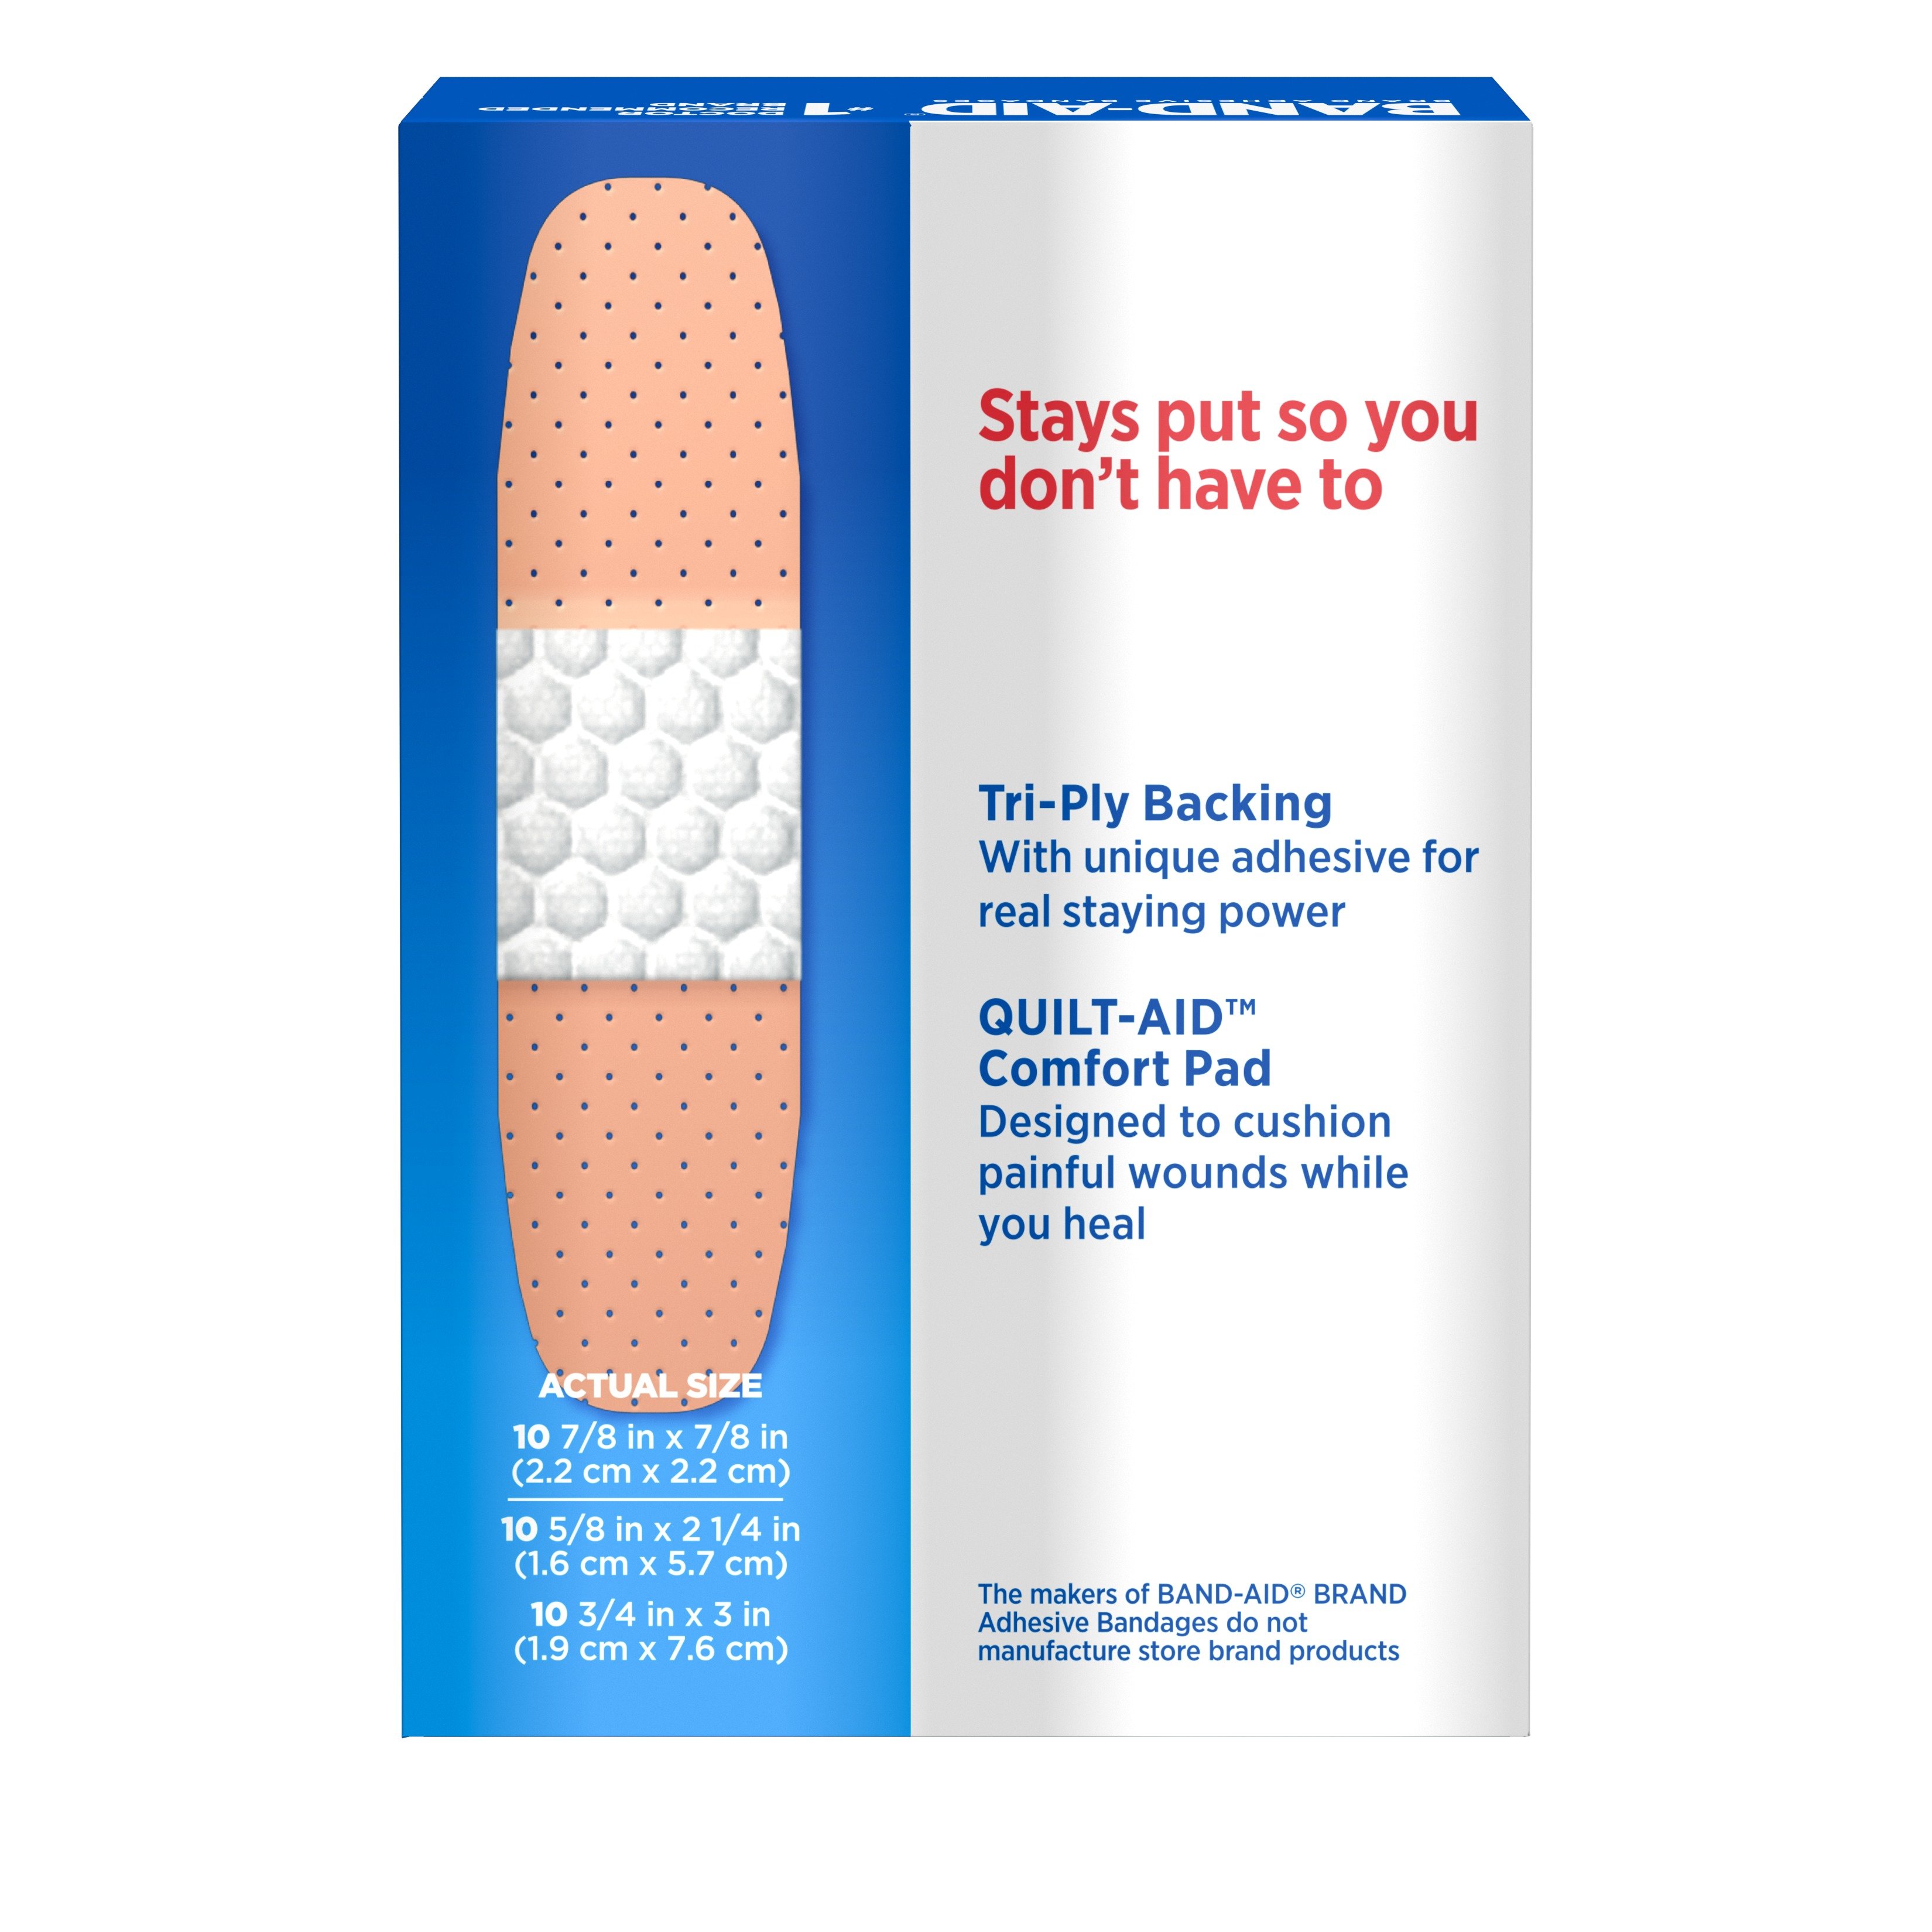 TRU-STAY® Plastic Breathable Adhesive Bandages